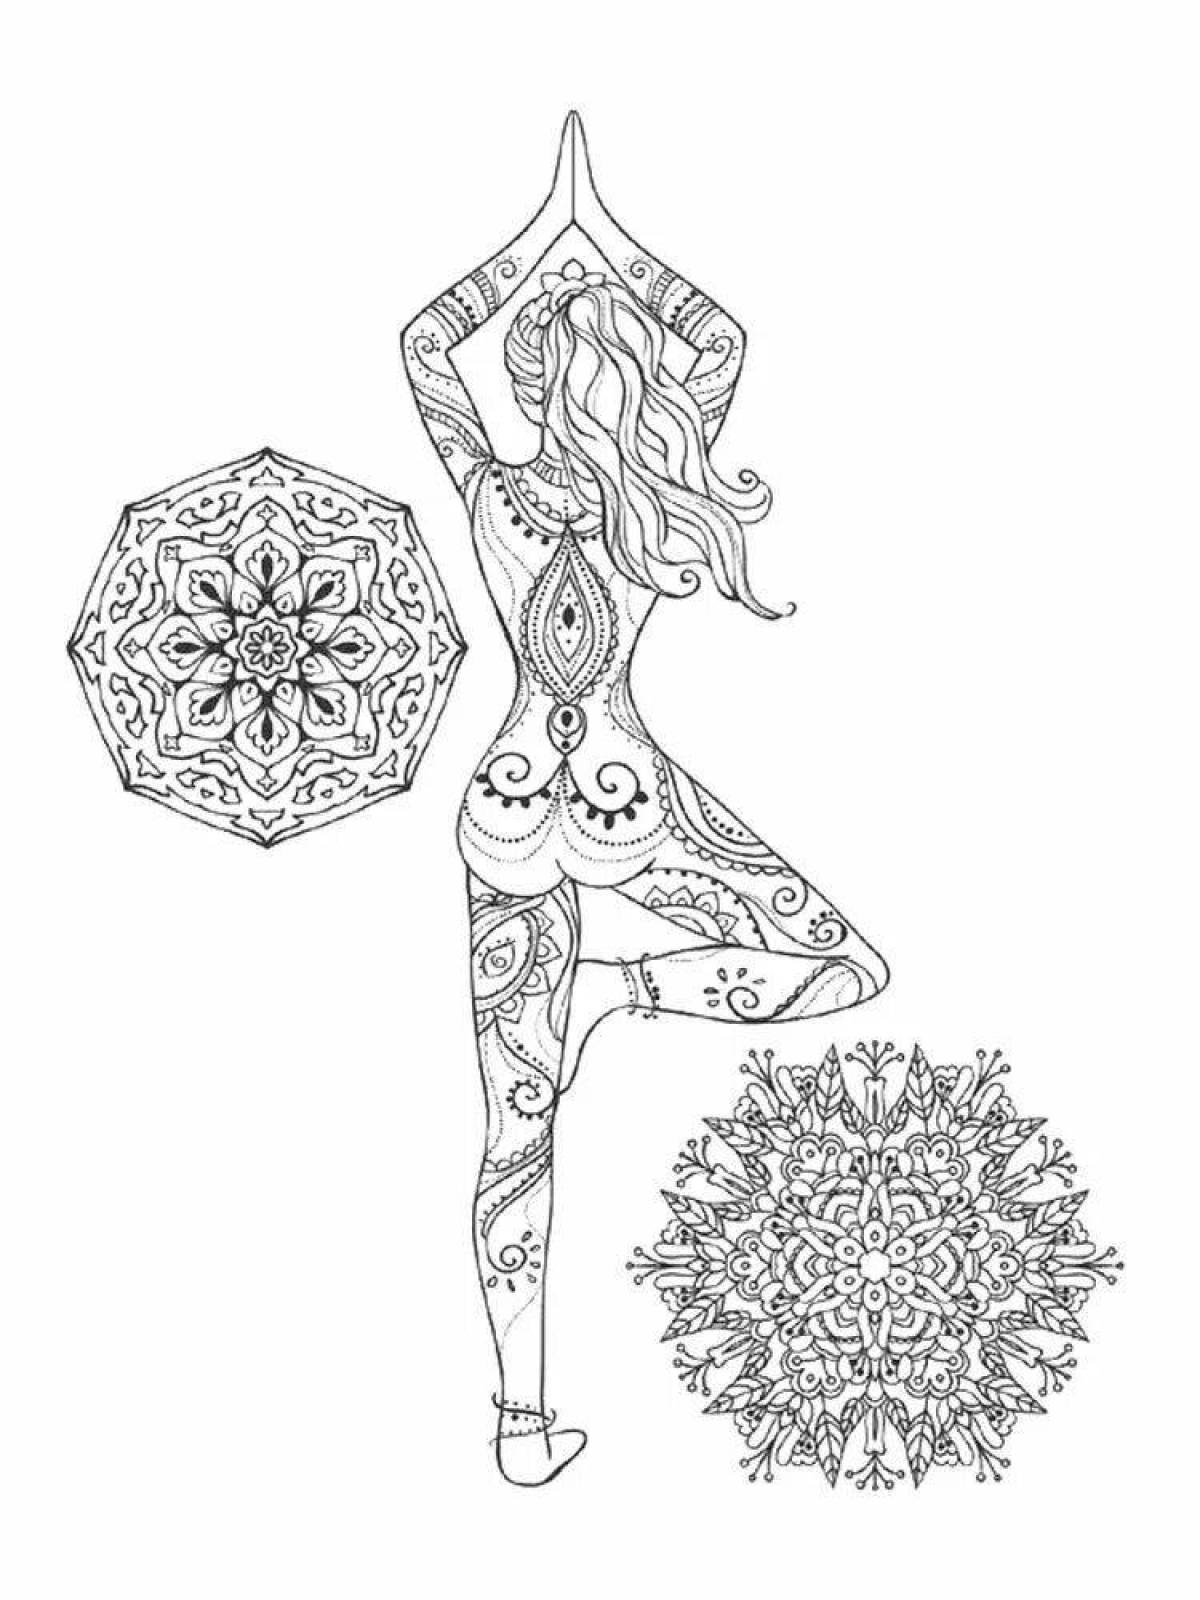 Radiant coloring page antistress art yoga